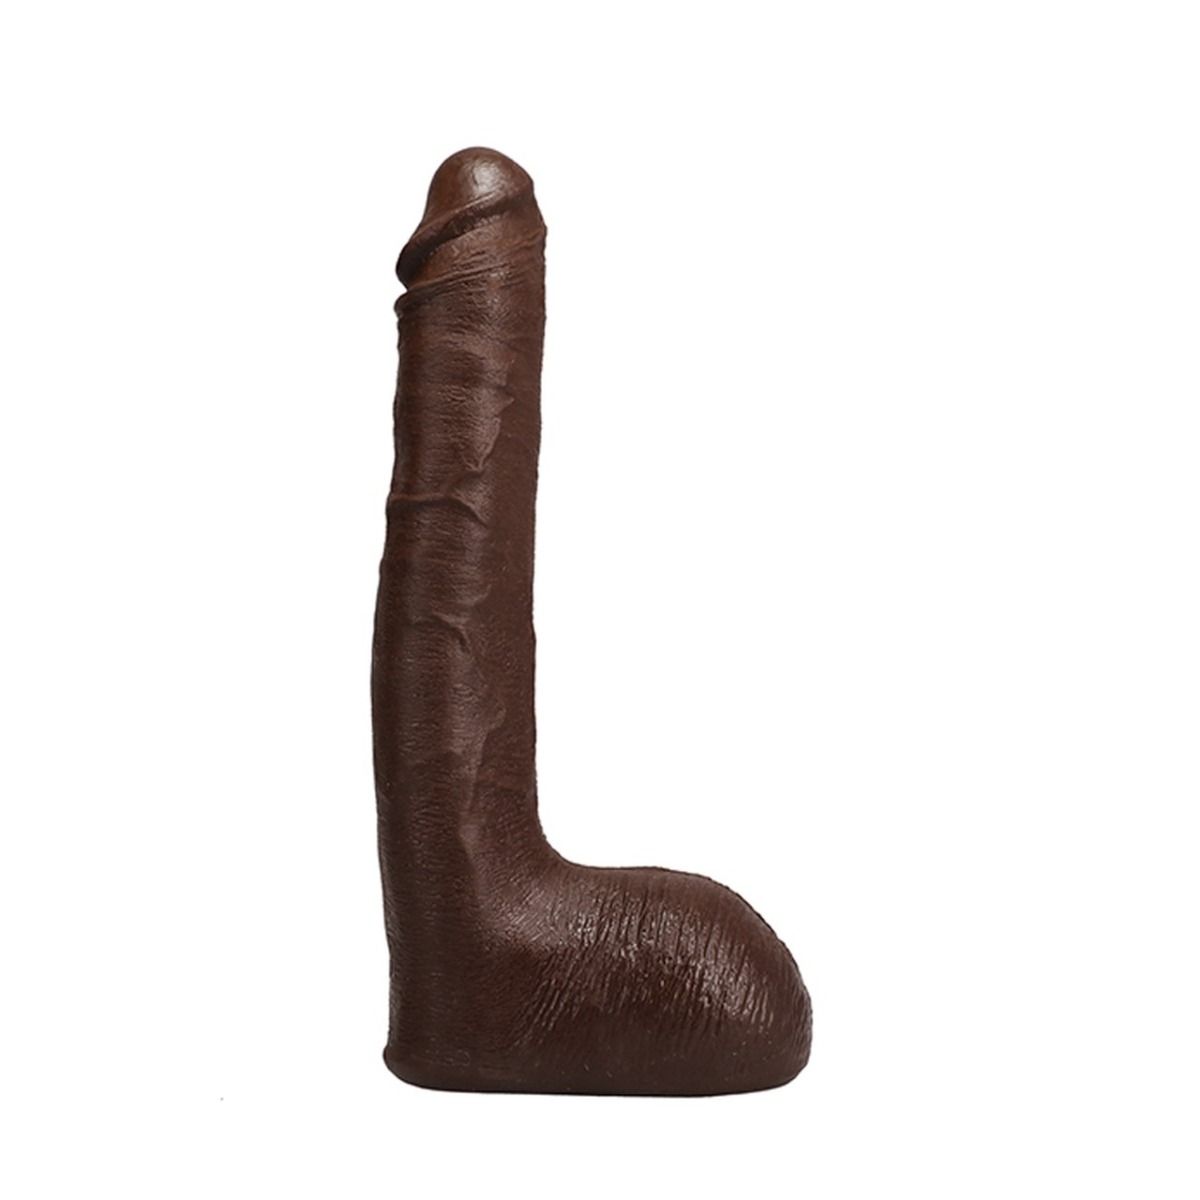 Dildos Signature Cocks - Ricky Johnson 10 Inch ULTRASKYN Cock with Removable Vac-U-Lock Suction Cup   